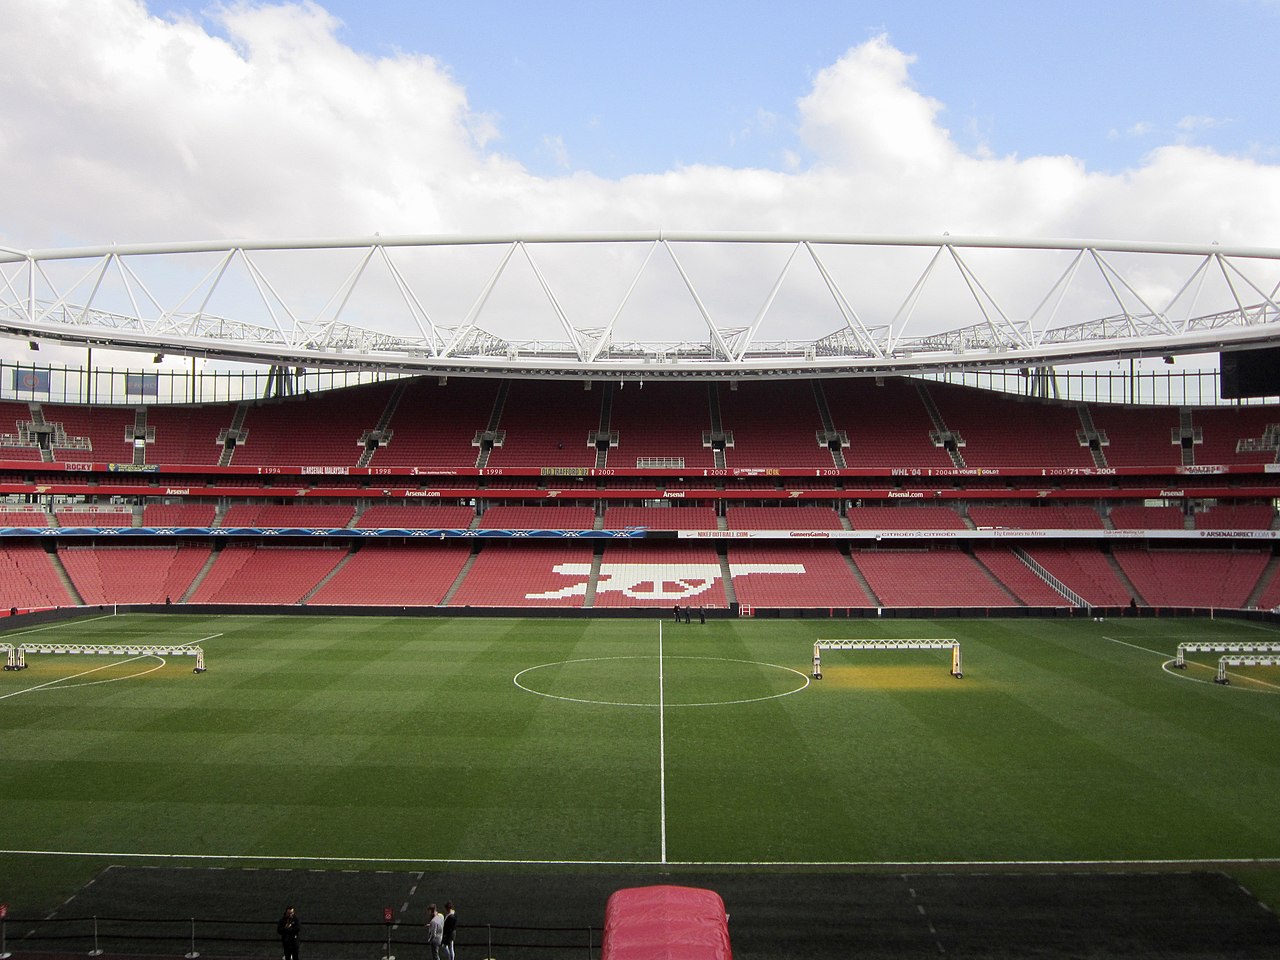 Arsenal's Stadium The Emirates- Will Mikel Arteta's side bring Manchester City's Aymeric Laporte to the Emirates?